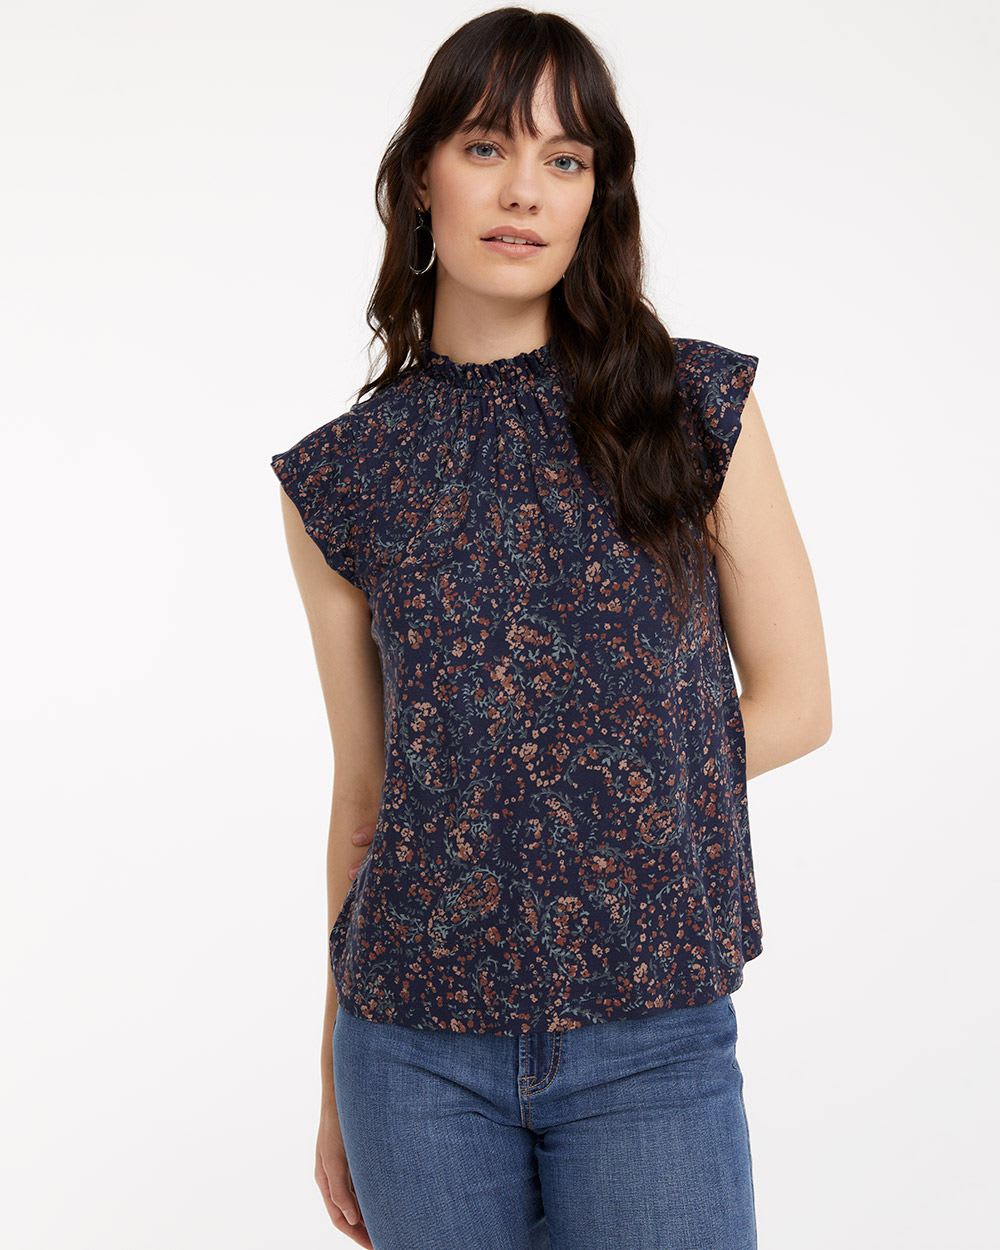 Printed Crew-Neck Top with Extended Ruffled Sleeves